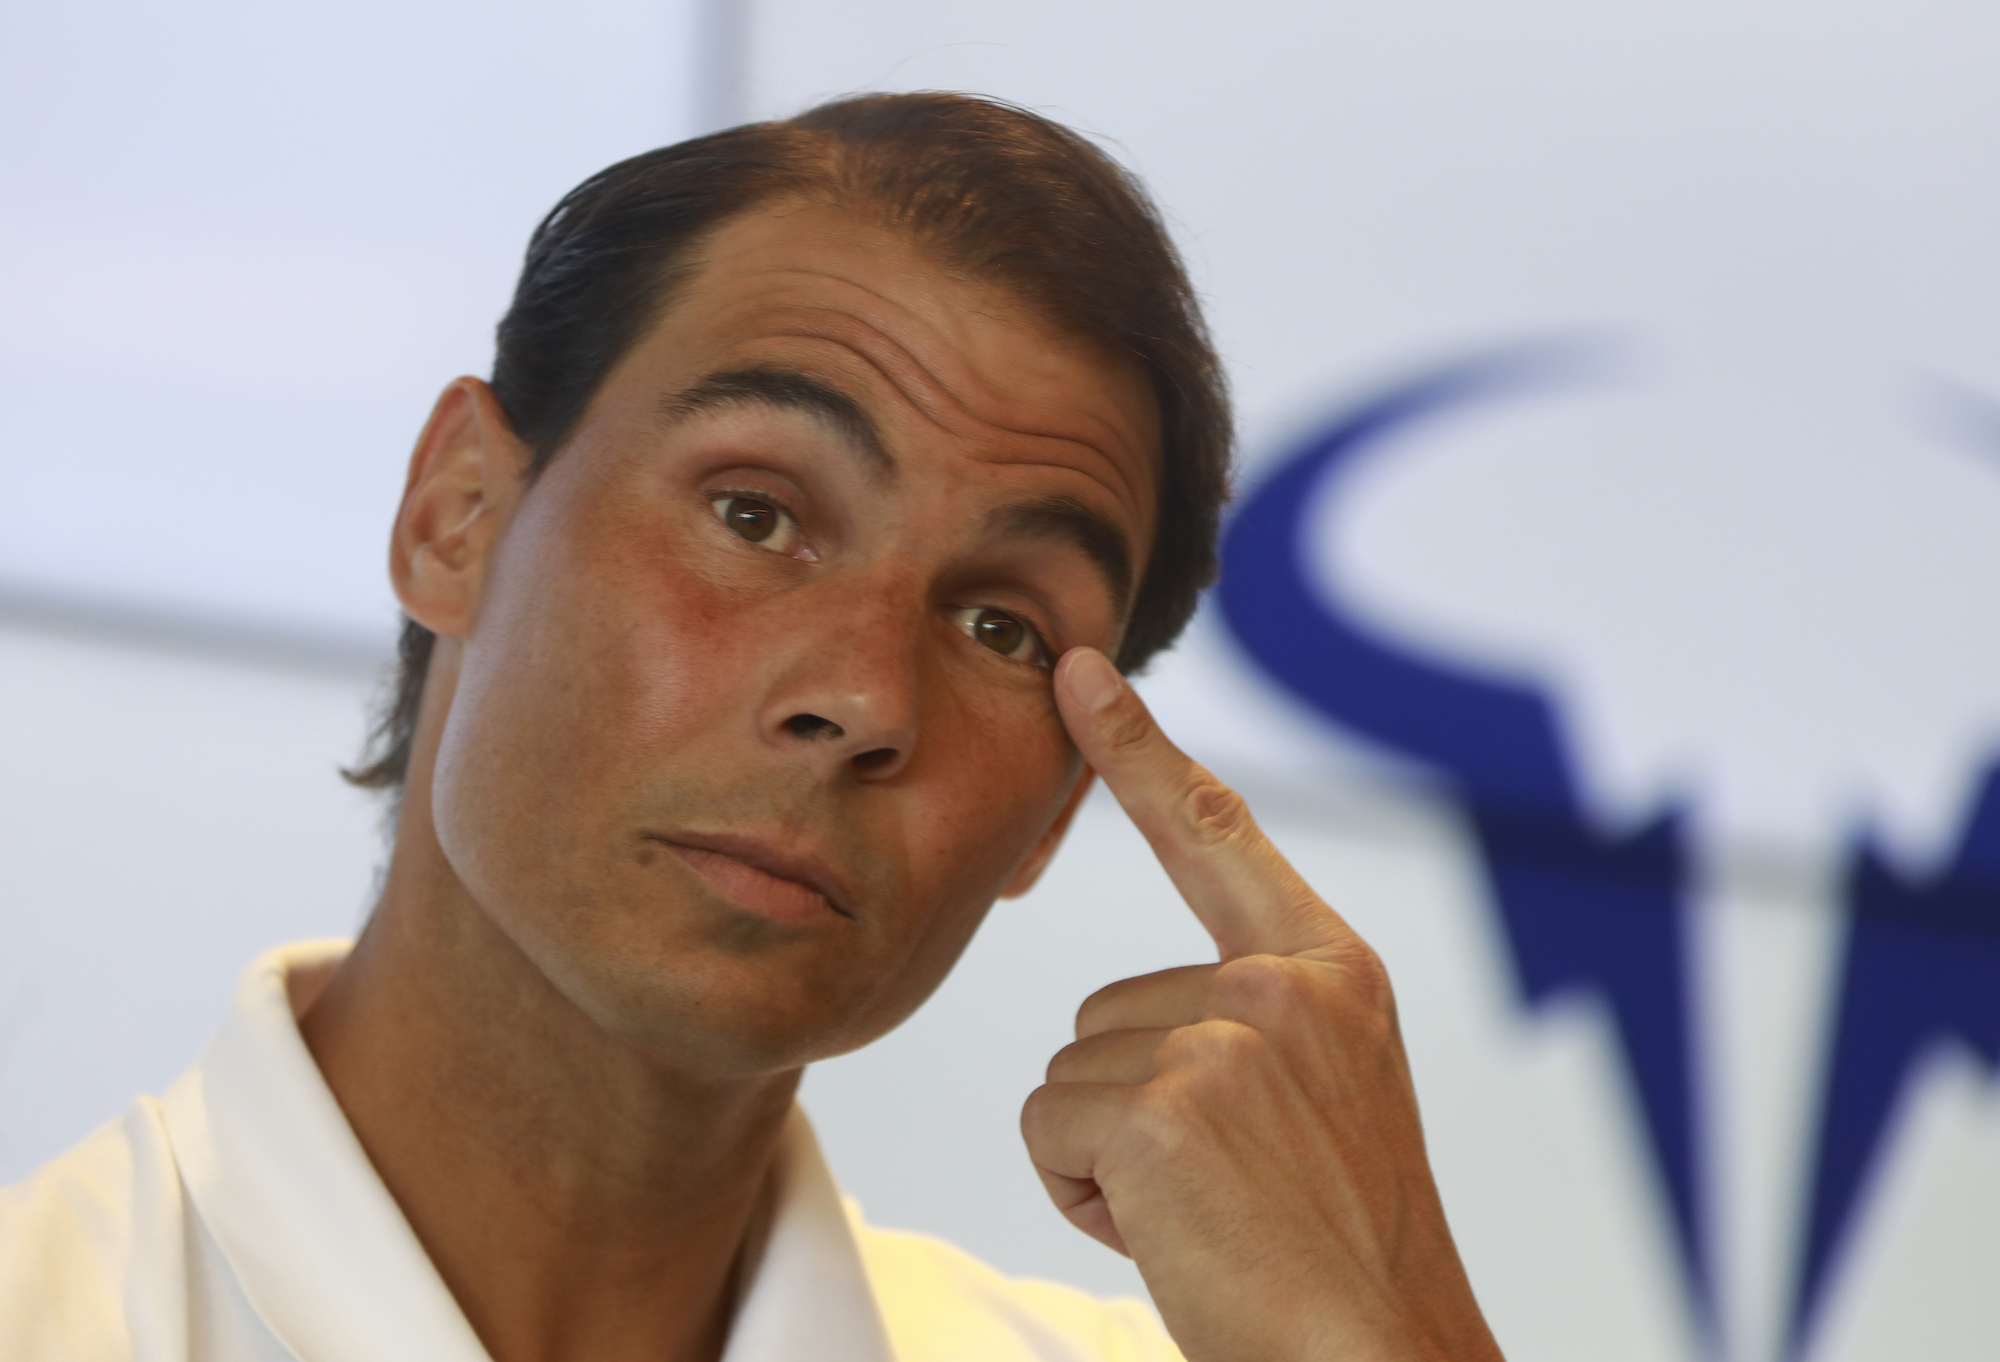 Rafael Nadal announces his withdrawal from the French Open